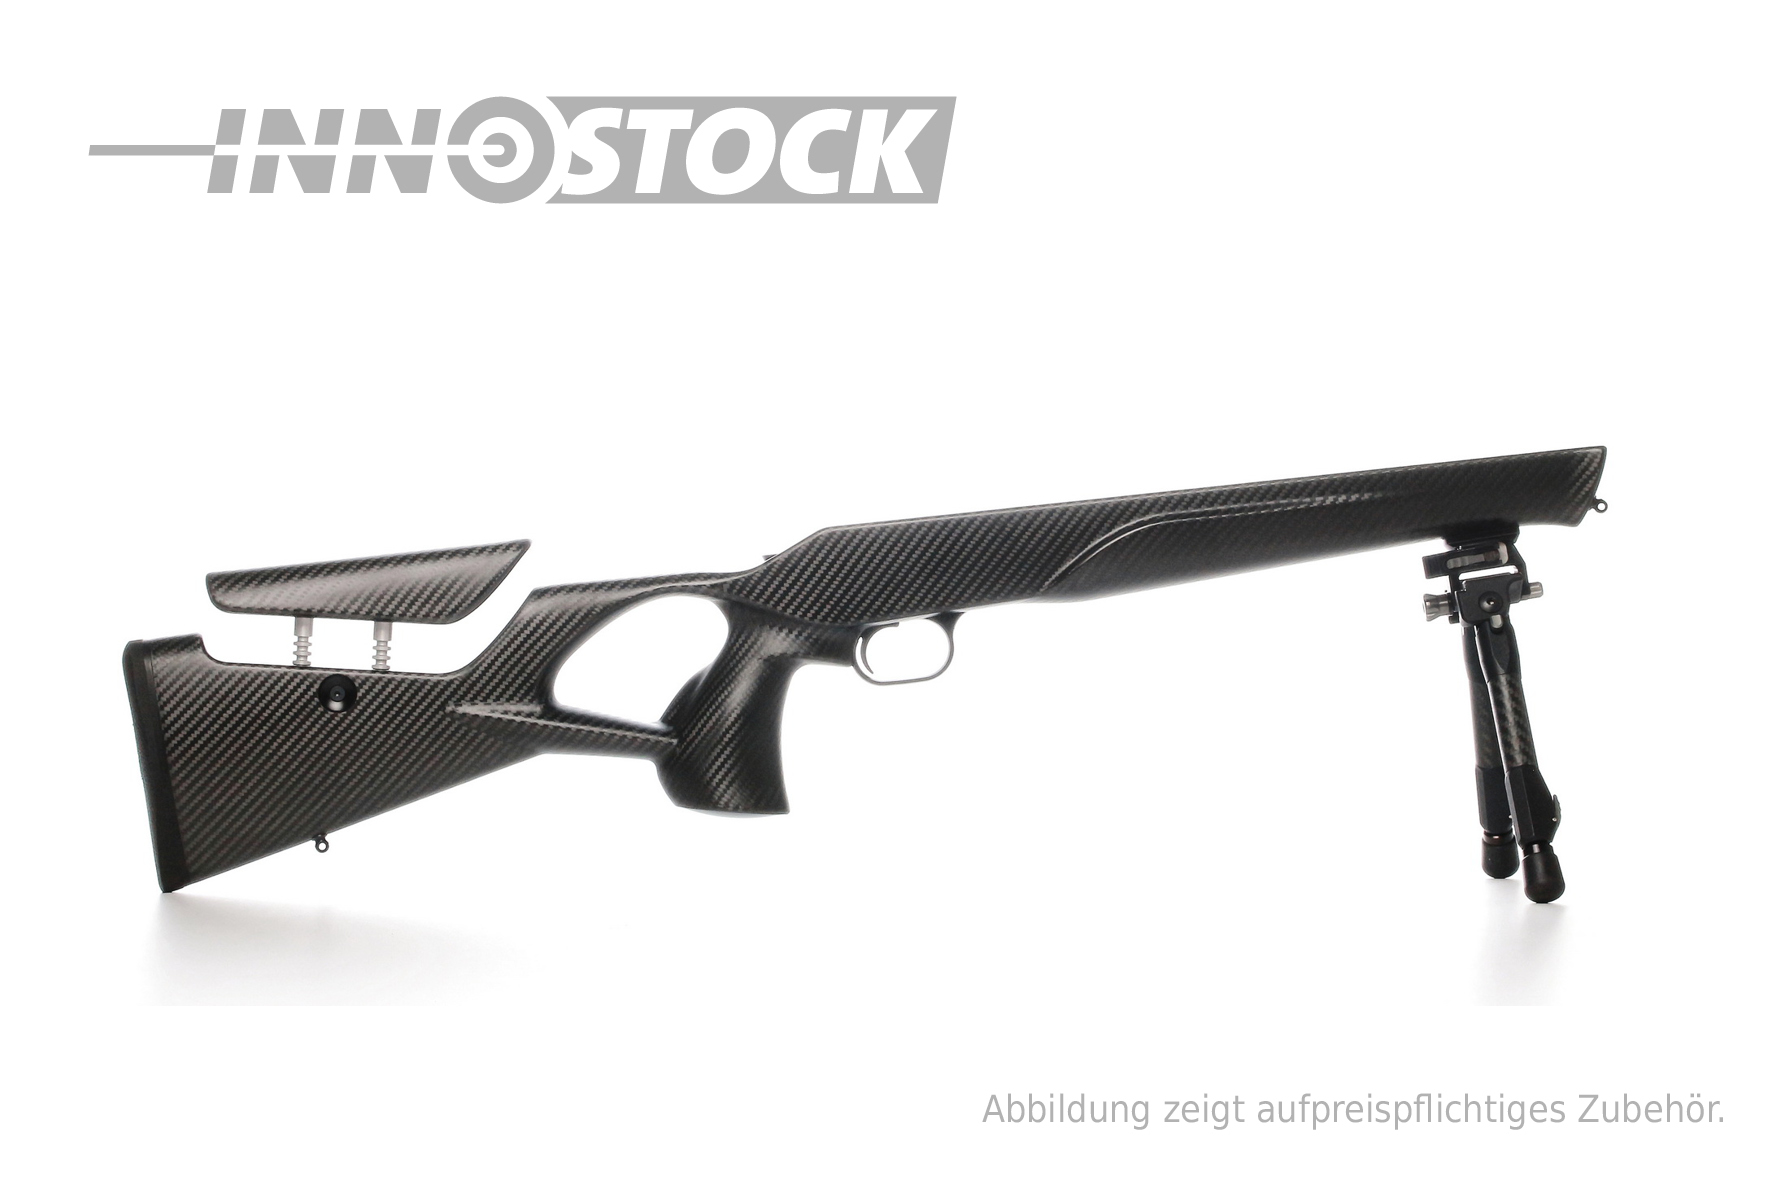 Carbon Stock - M932 - for System Blaser R93 - Semi Weight (19MM)